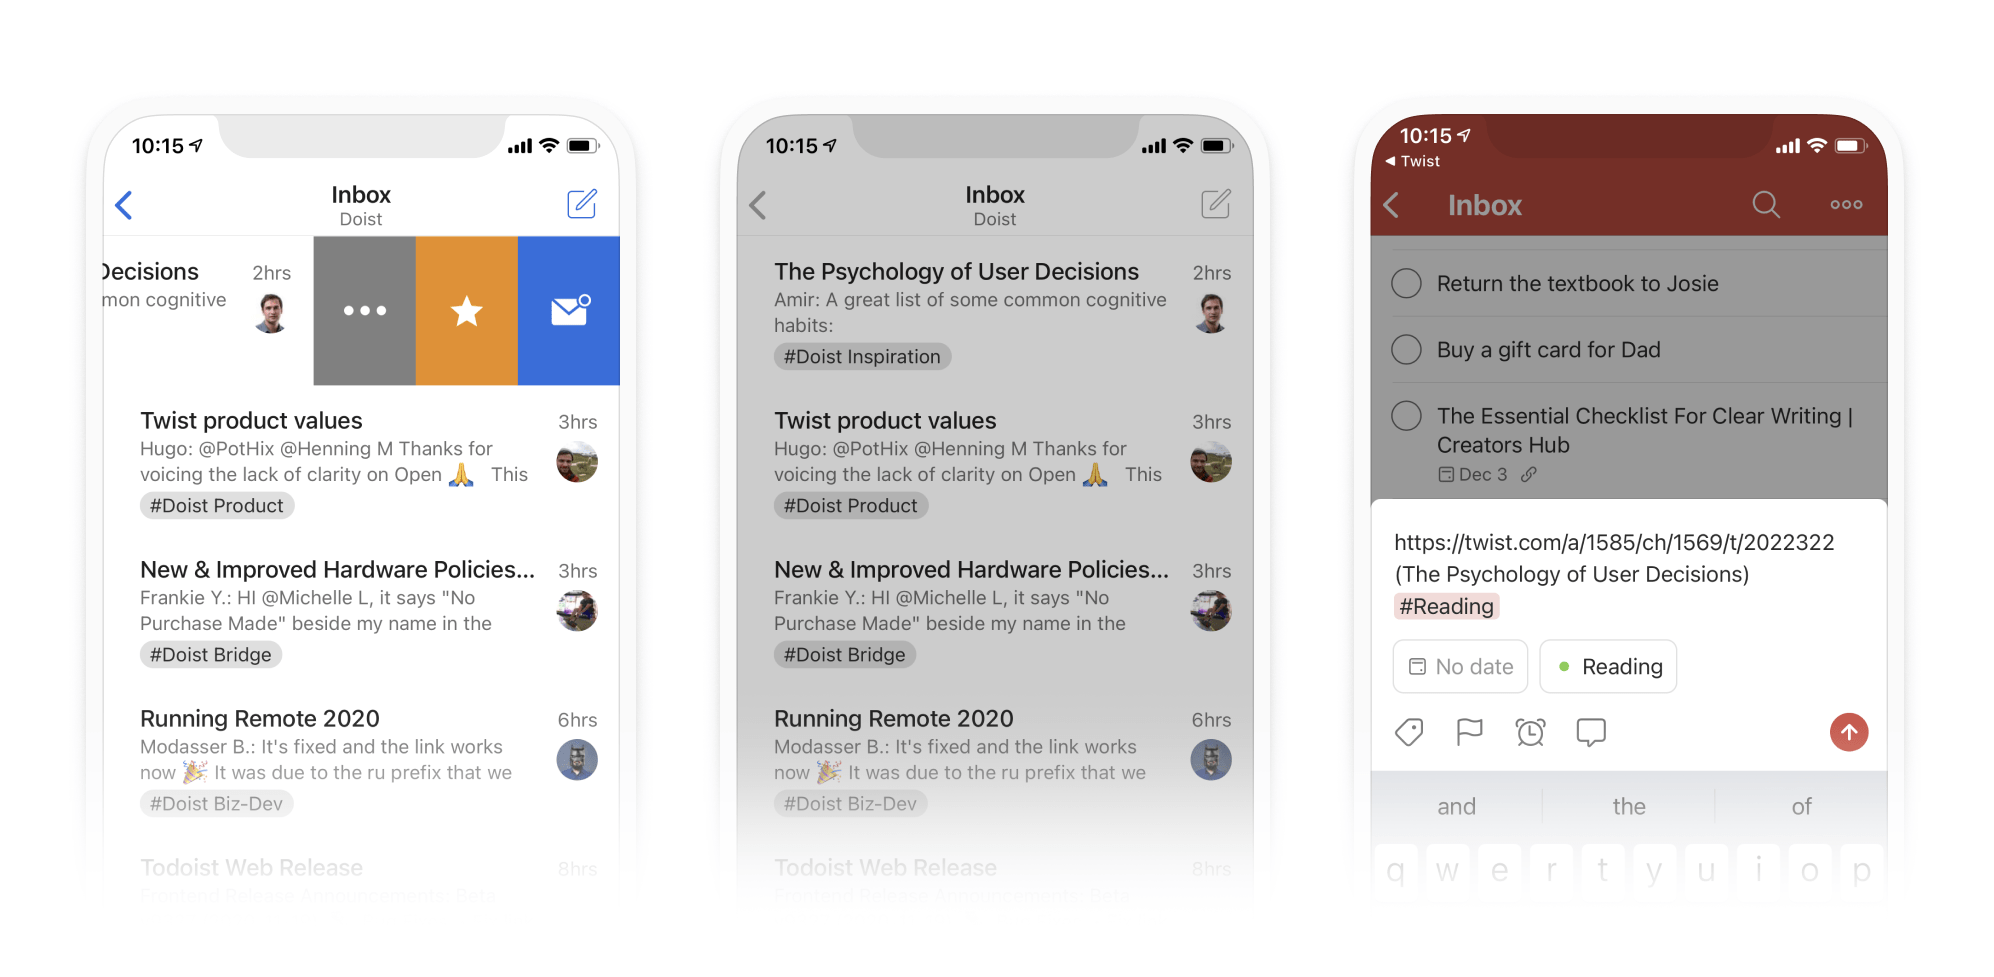 todoist for managers Twist & Todoist Integration